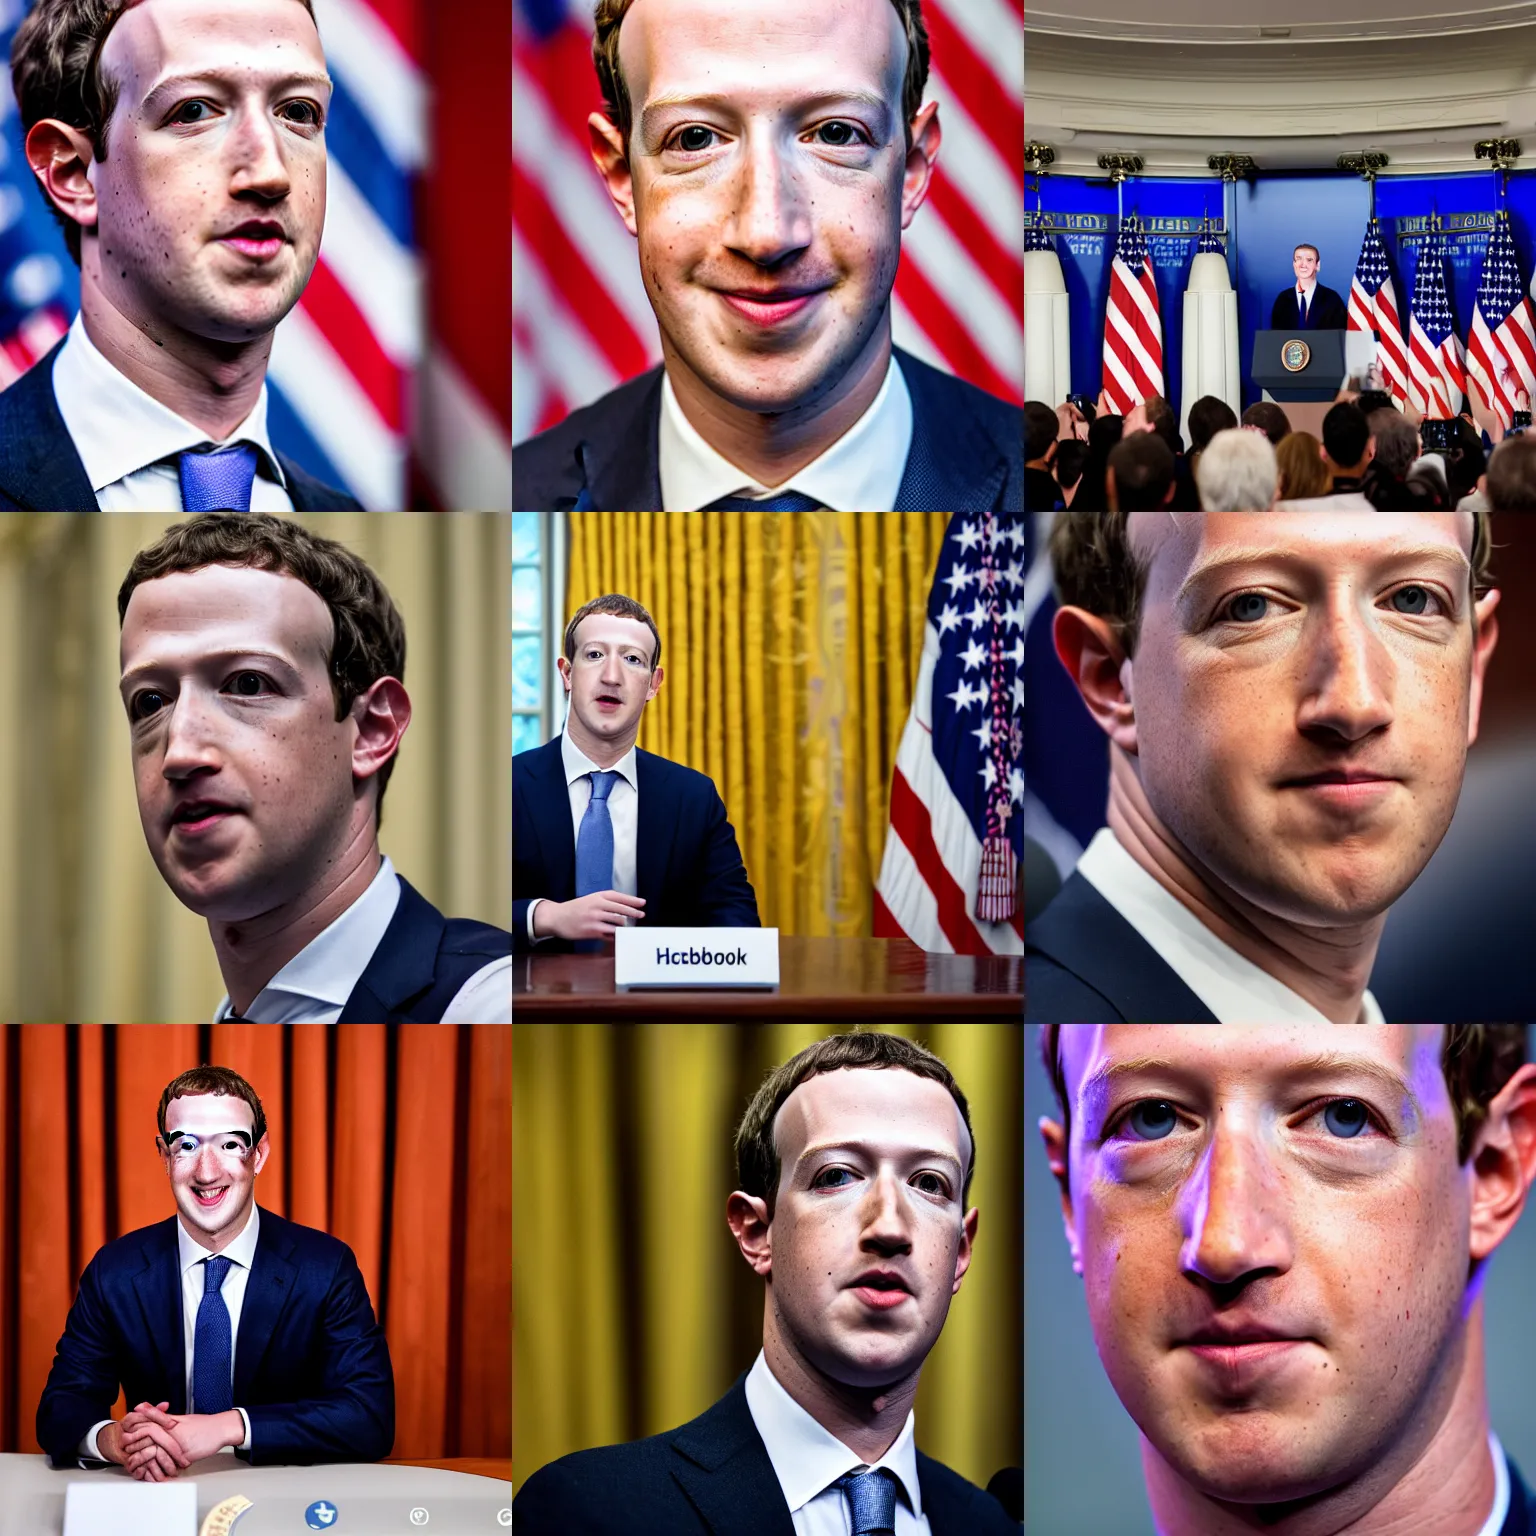 Prompt: headshot of Mark Zuckerberg the president of the united states in the white house press room, EOS-1D, f/1.4, ISO 200, 1/160s, 8K, RAW, unedited, symmetrical balance, in-frame, Photoshop, Nvidia, Topaz AI